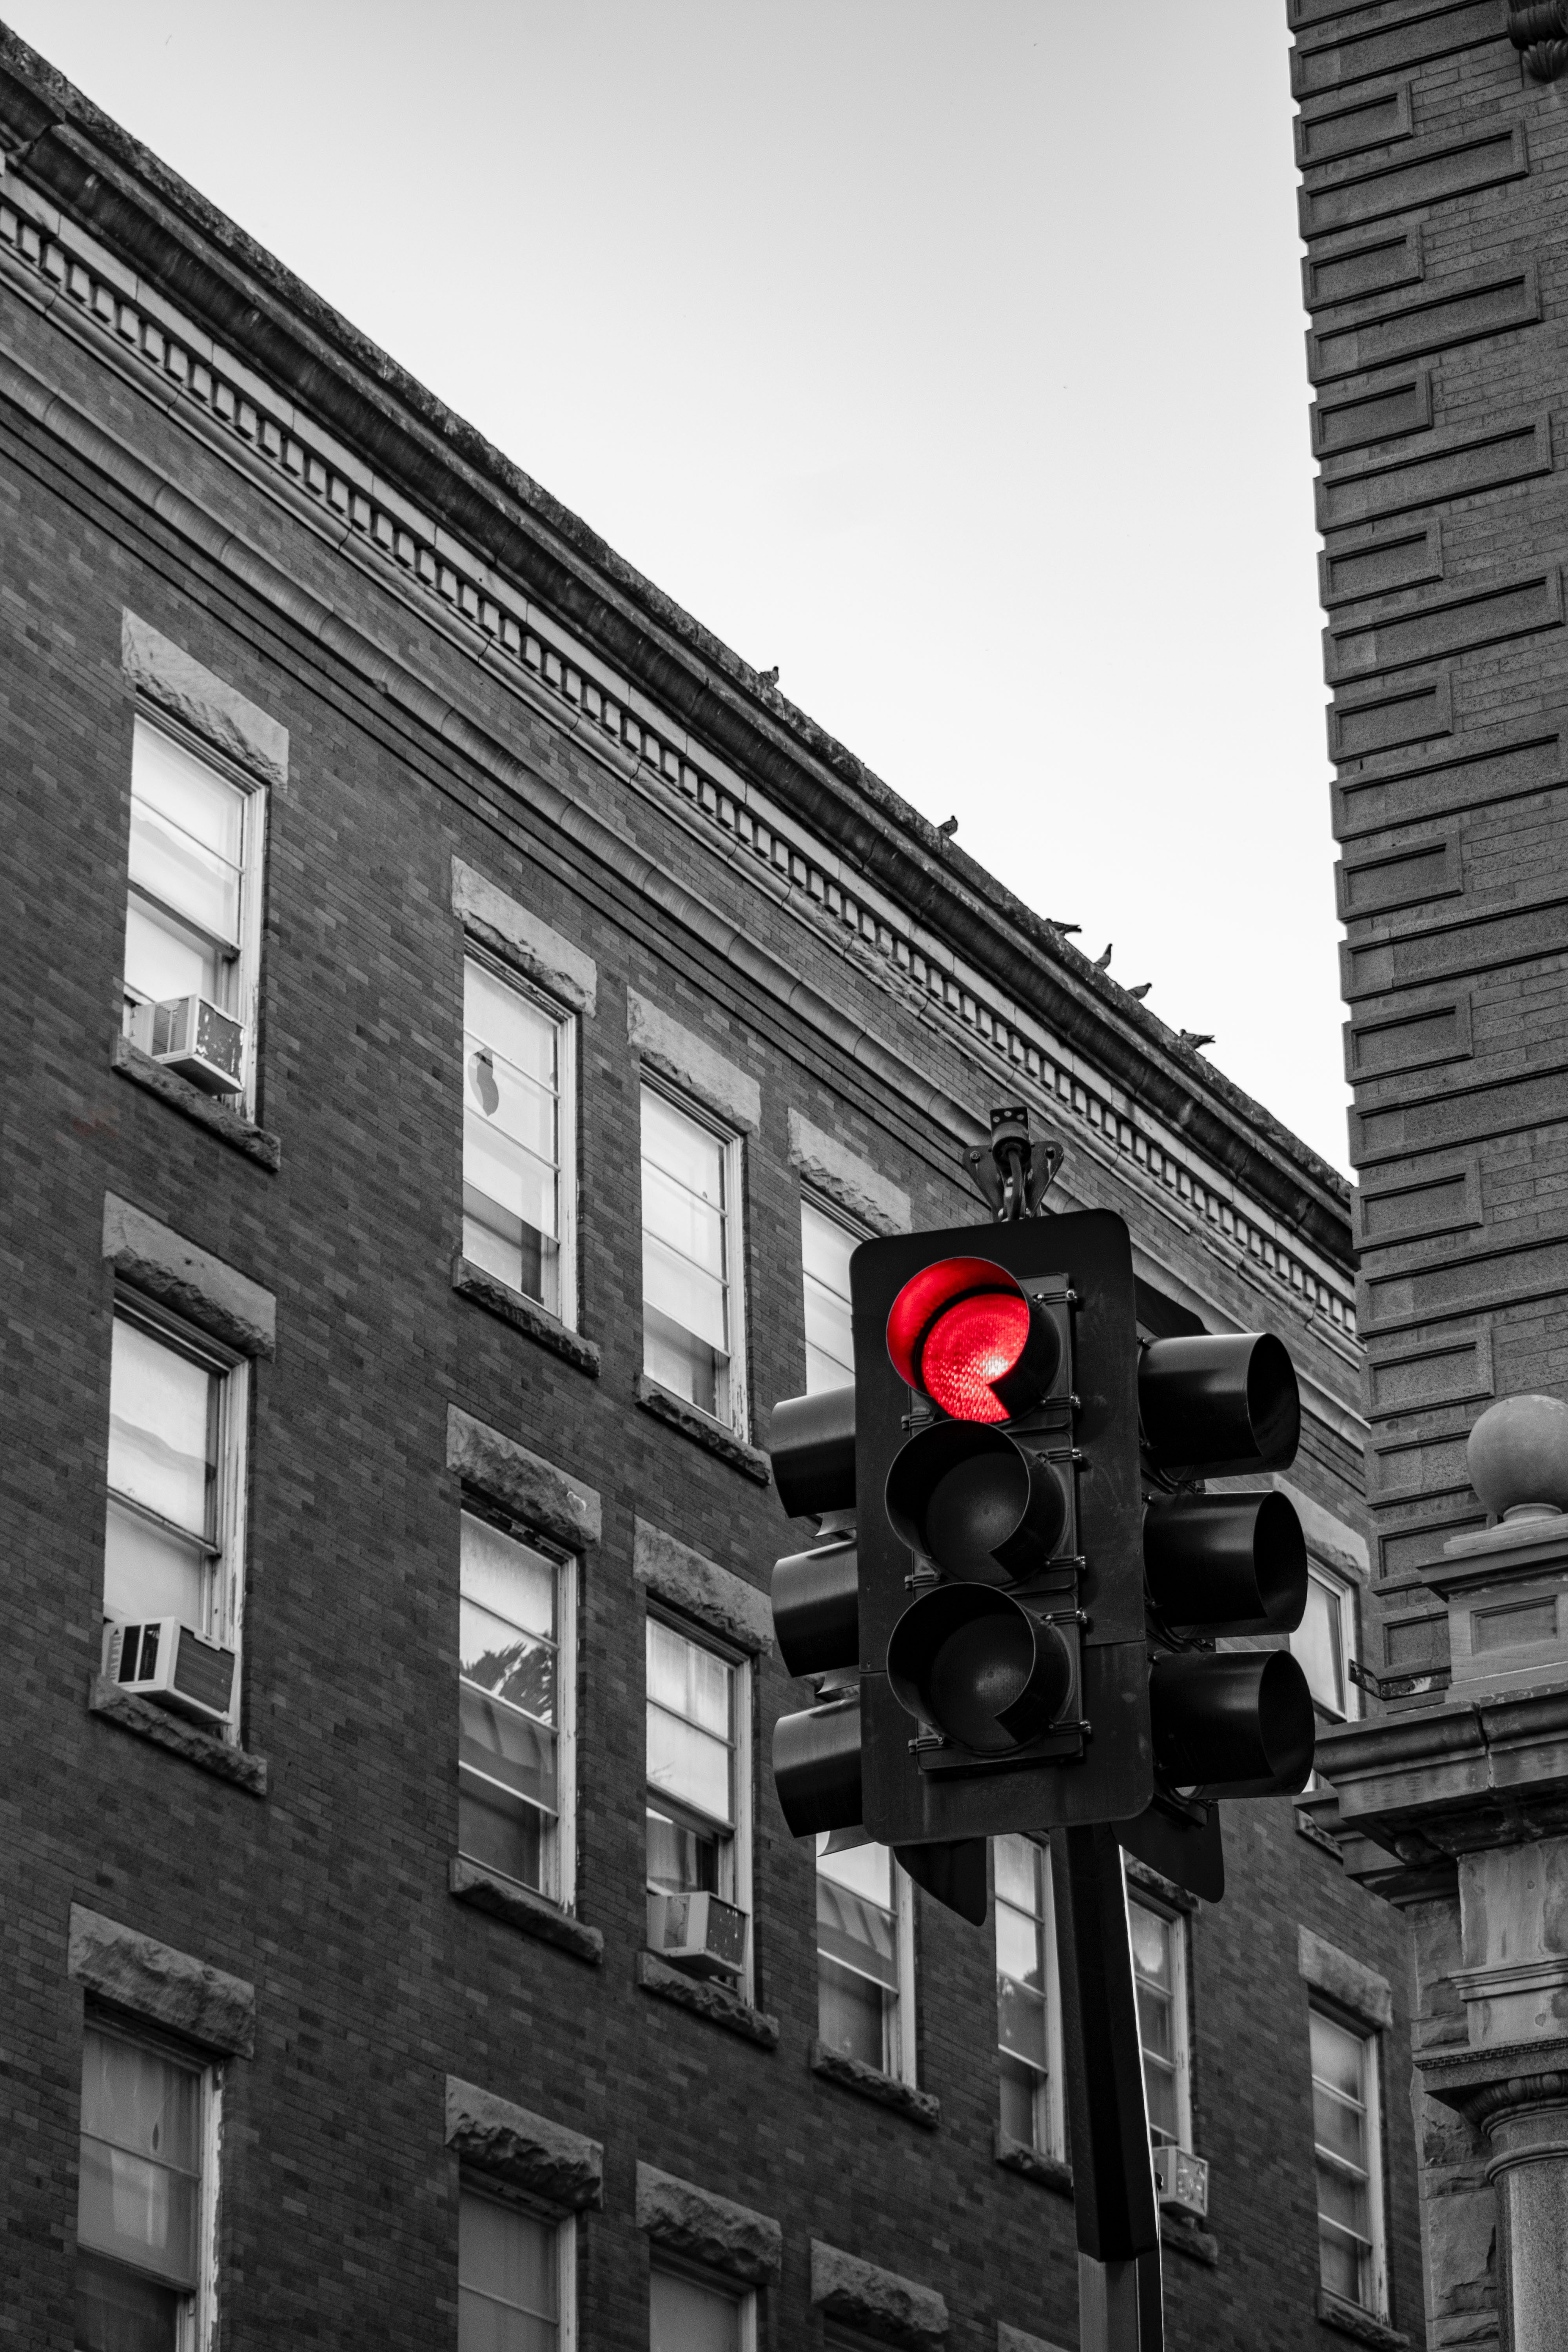 Free HD traffic light, red, city, building, miscellanea, miscellaneous, glow